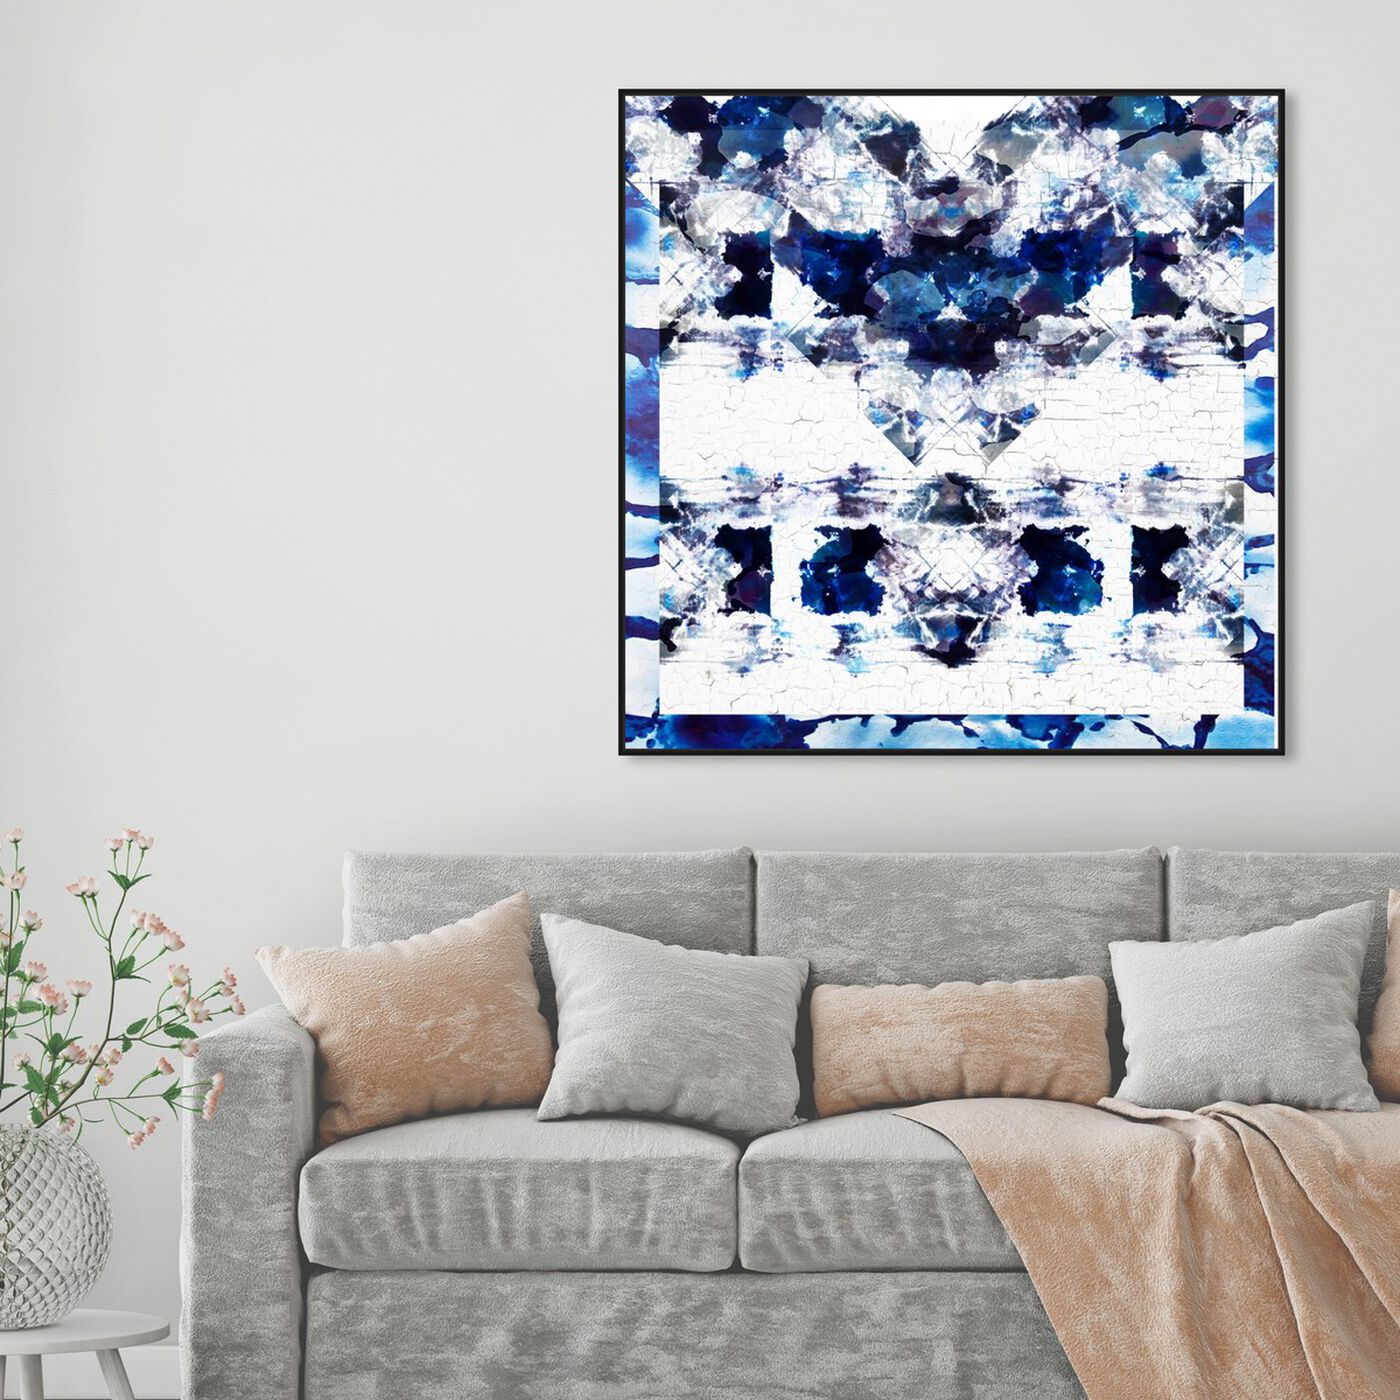 Hanging view of Oeuvre in Blue featuring abstract and patterns art.